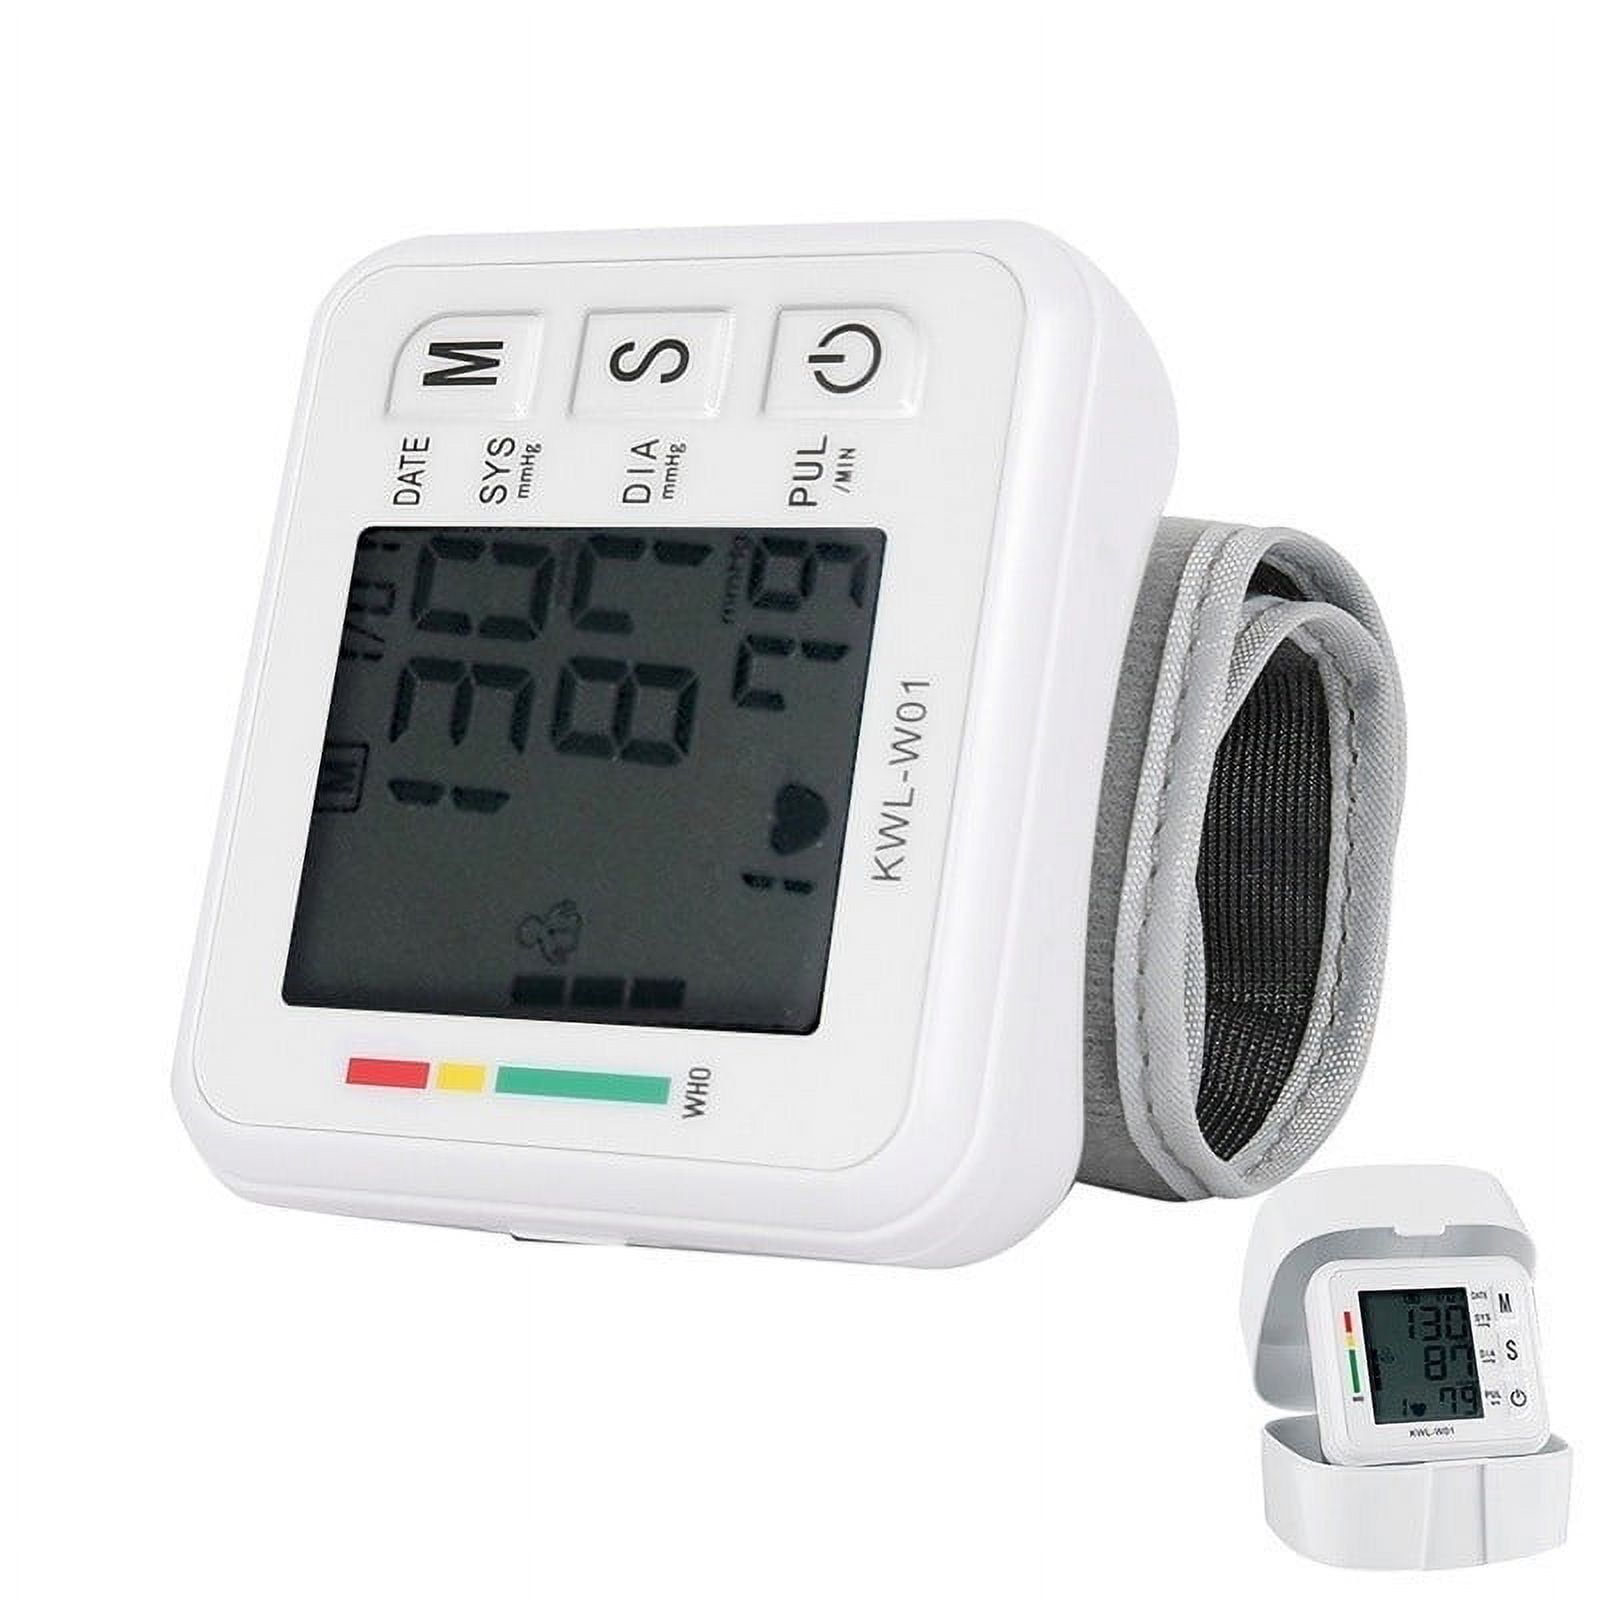 Tidoin White Blood Pressure Monitor Wrist BP Monitor with Large LCD Display Adjustable Wrist Cuff